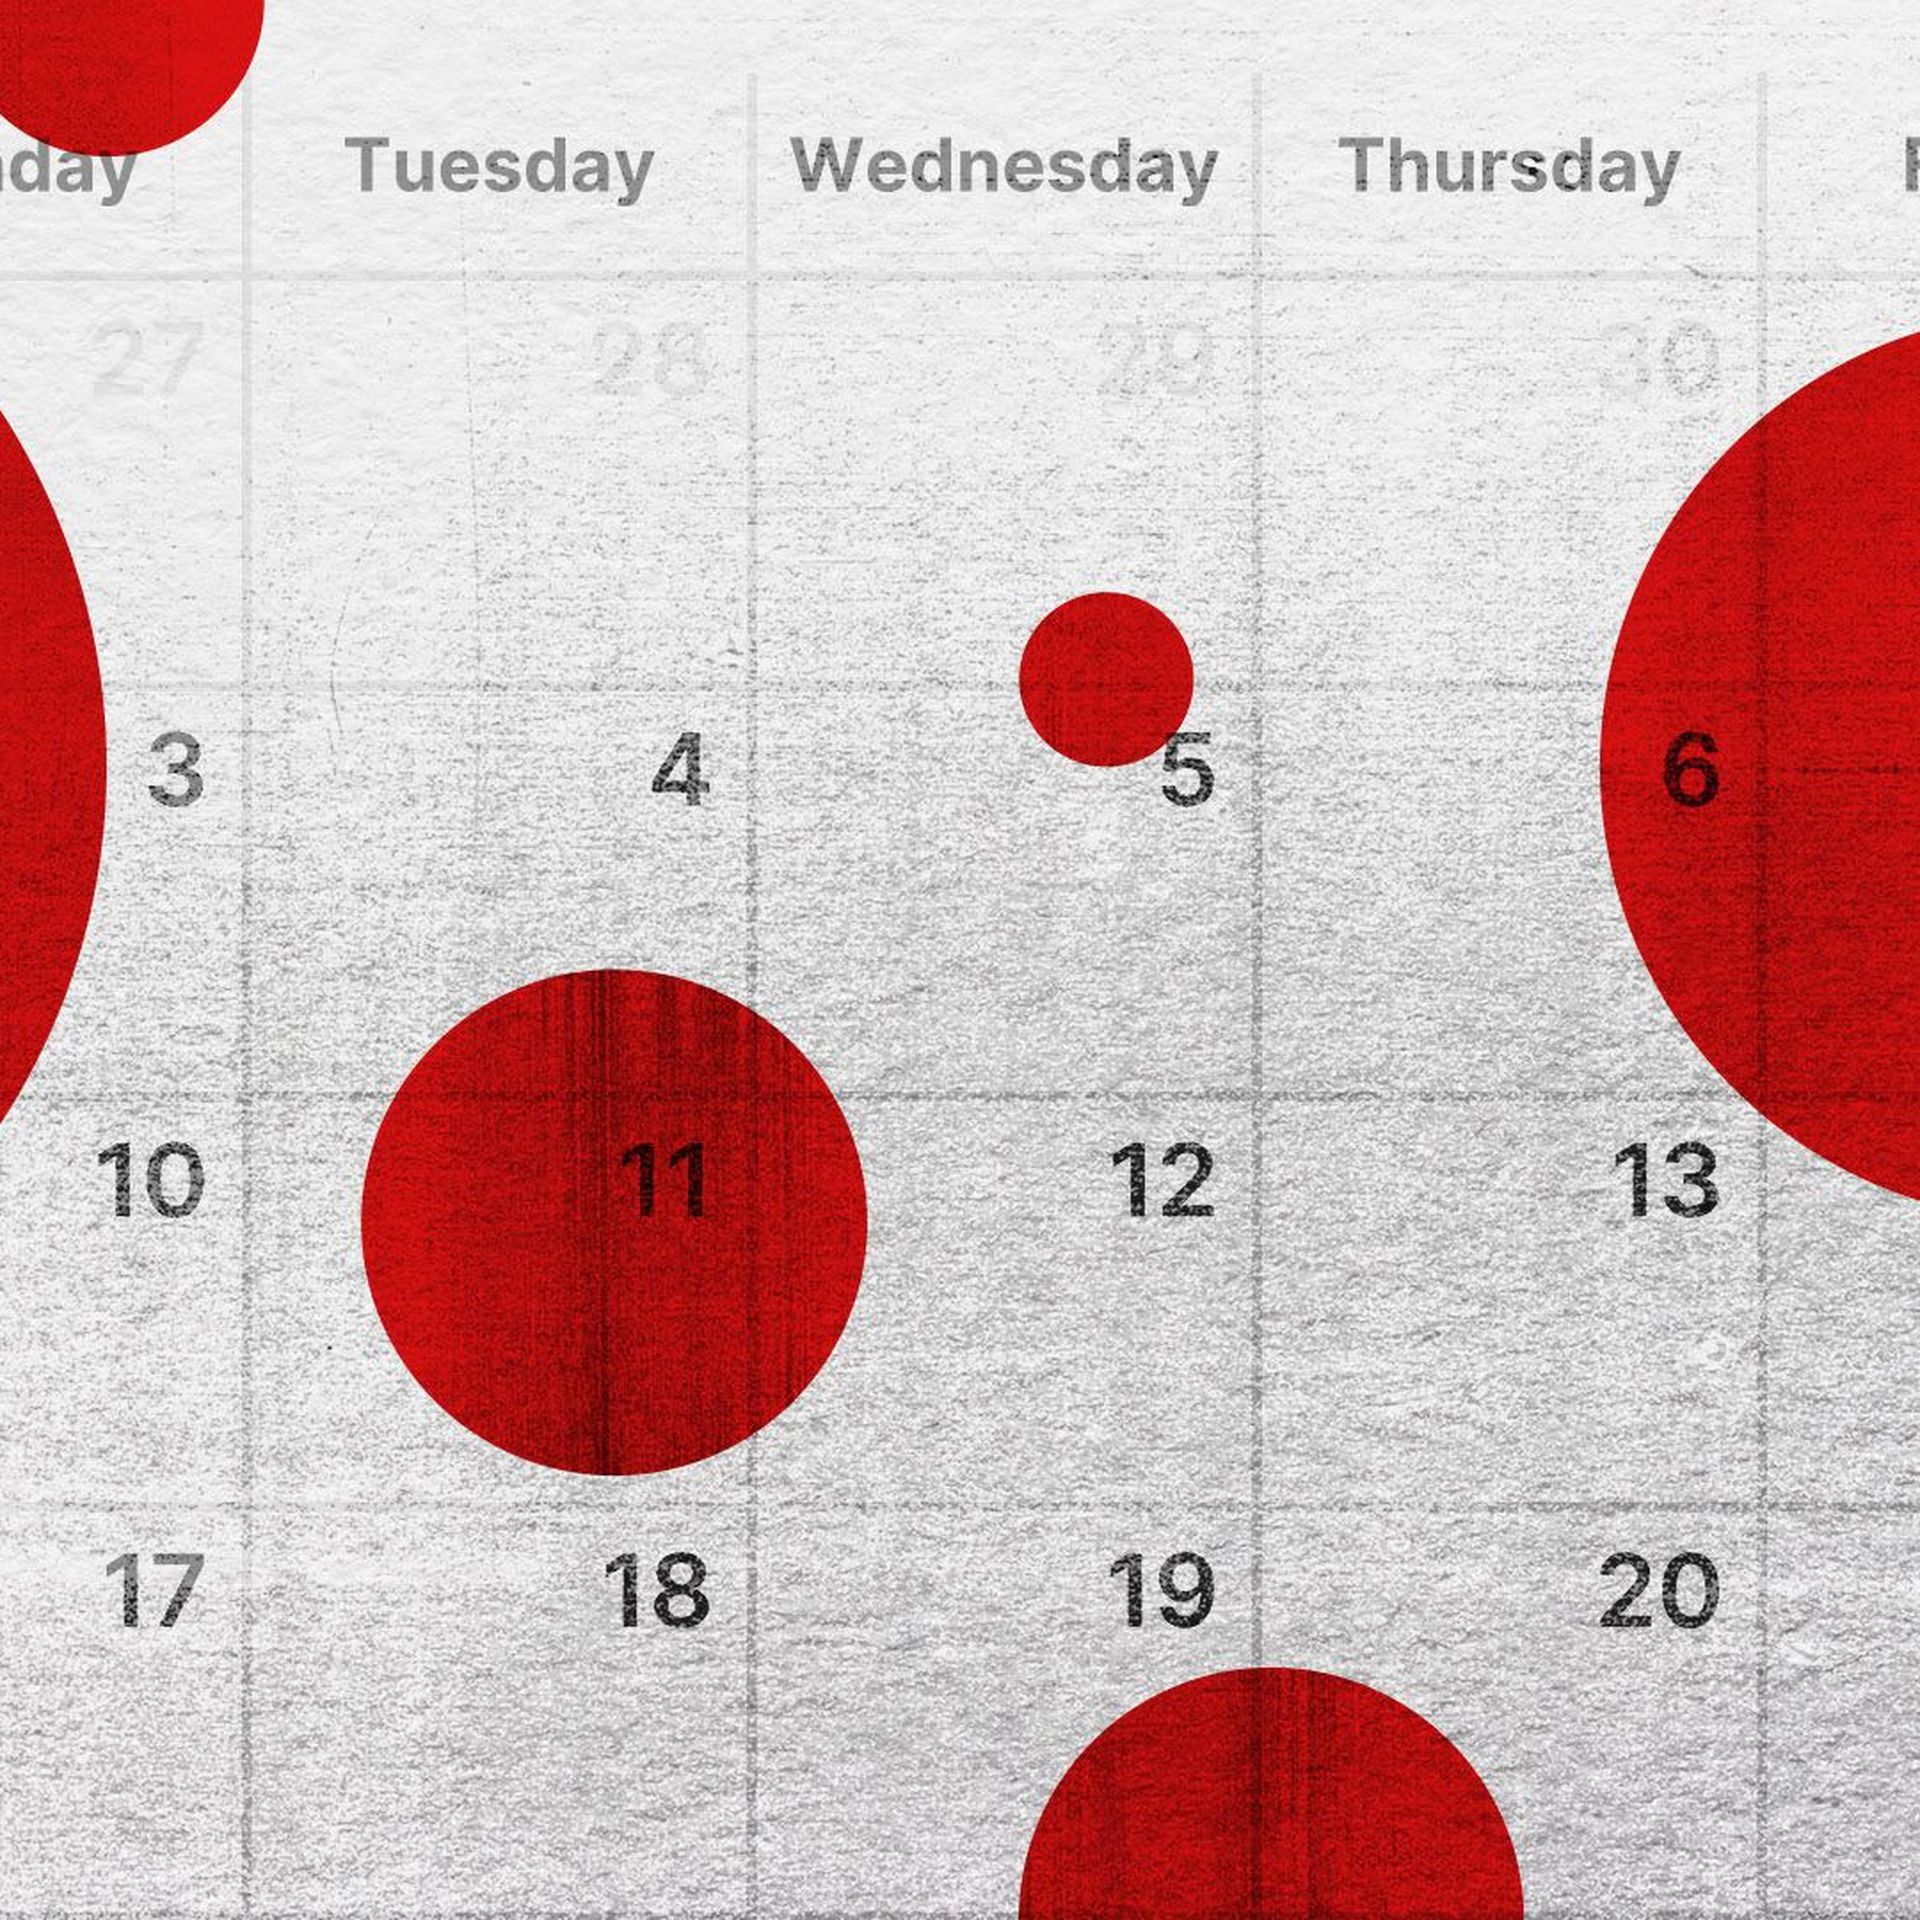 Illustration of a calendar with red circles.